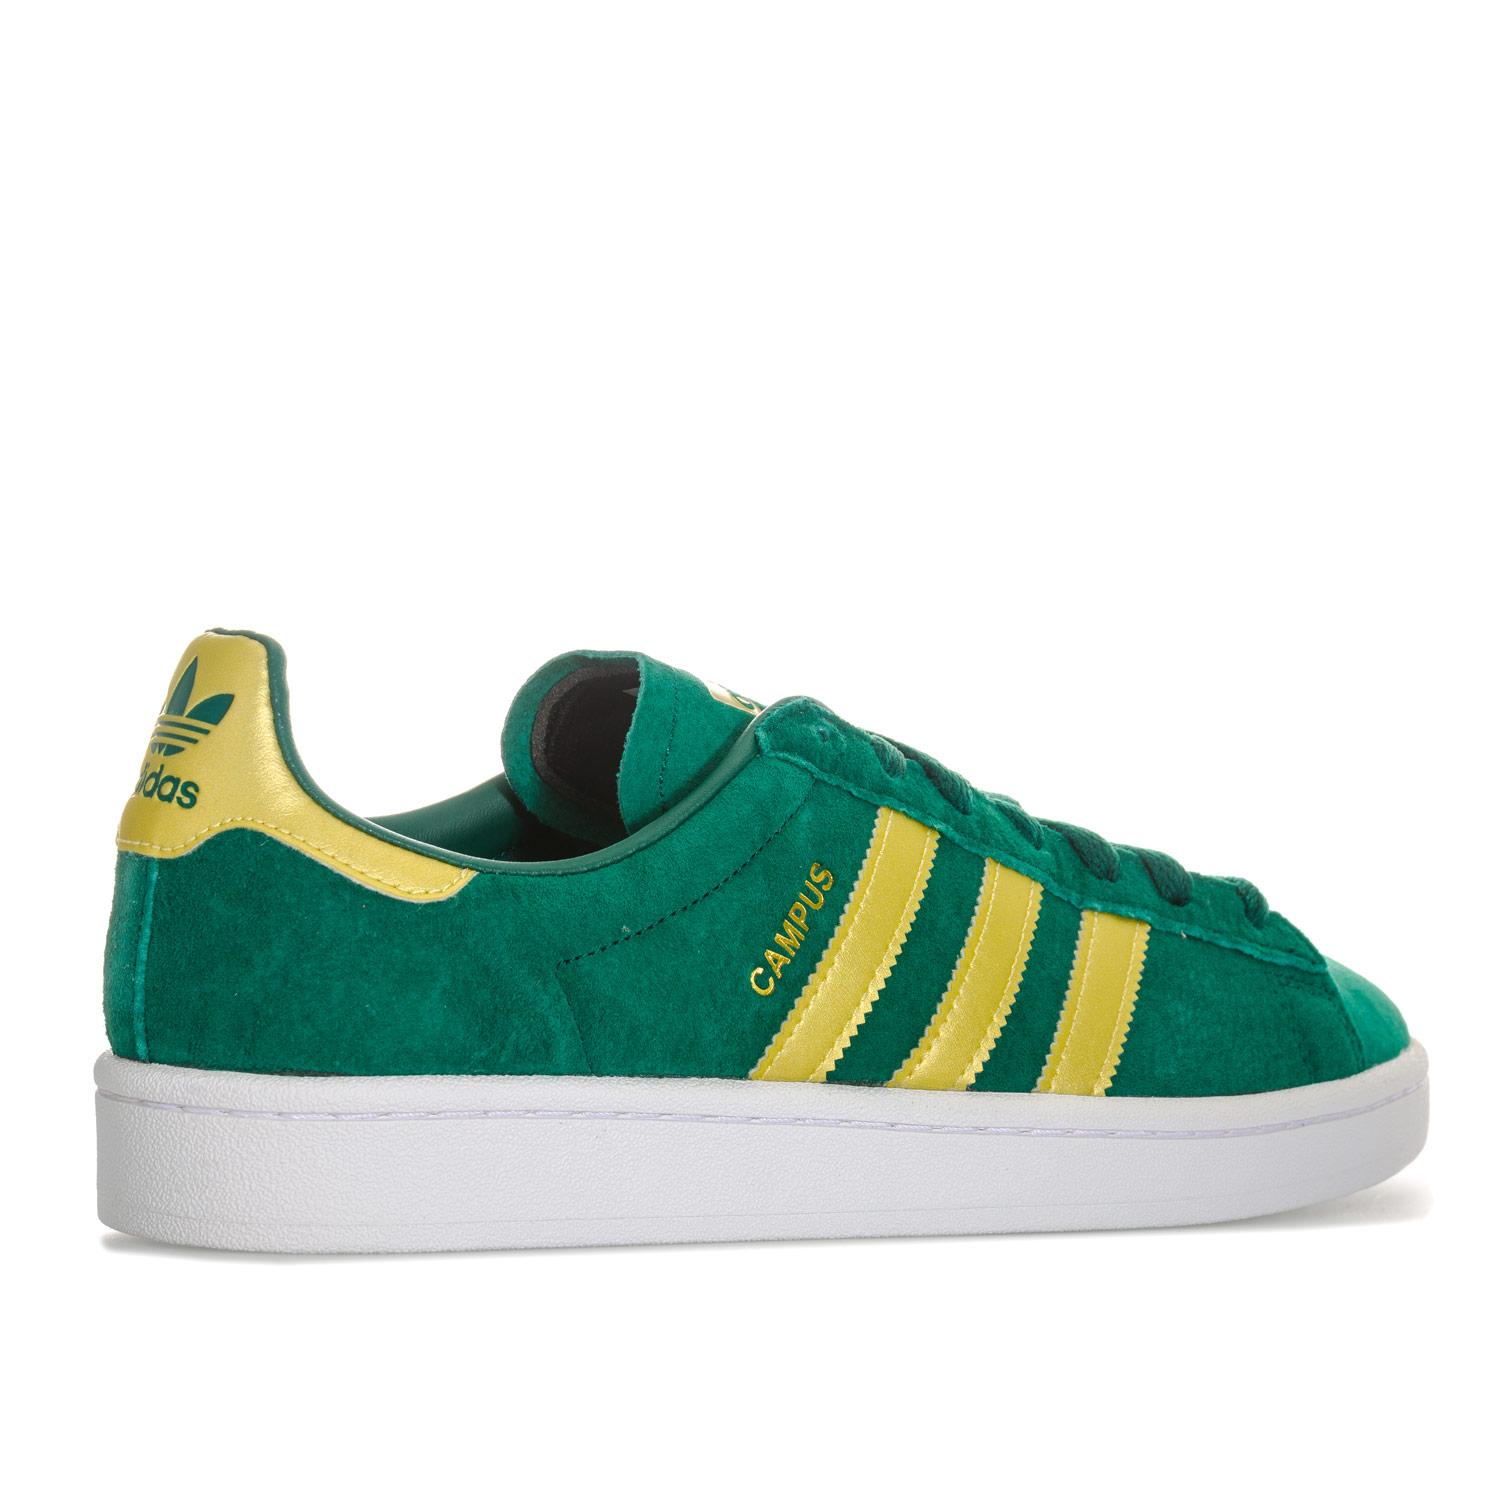 green and yellow adidas trainers